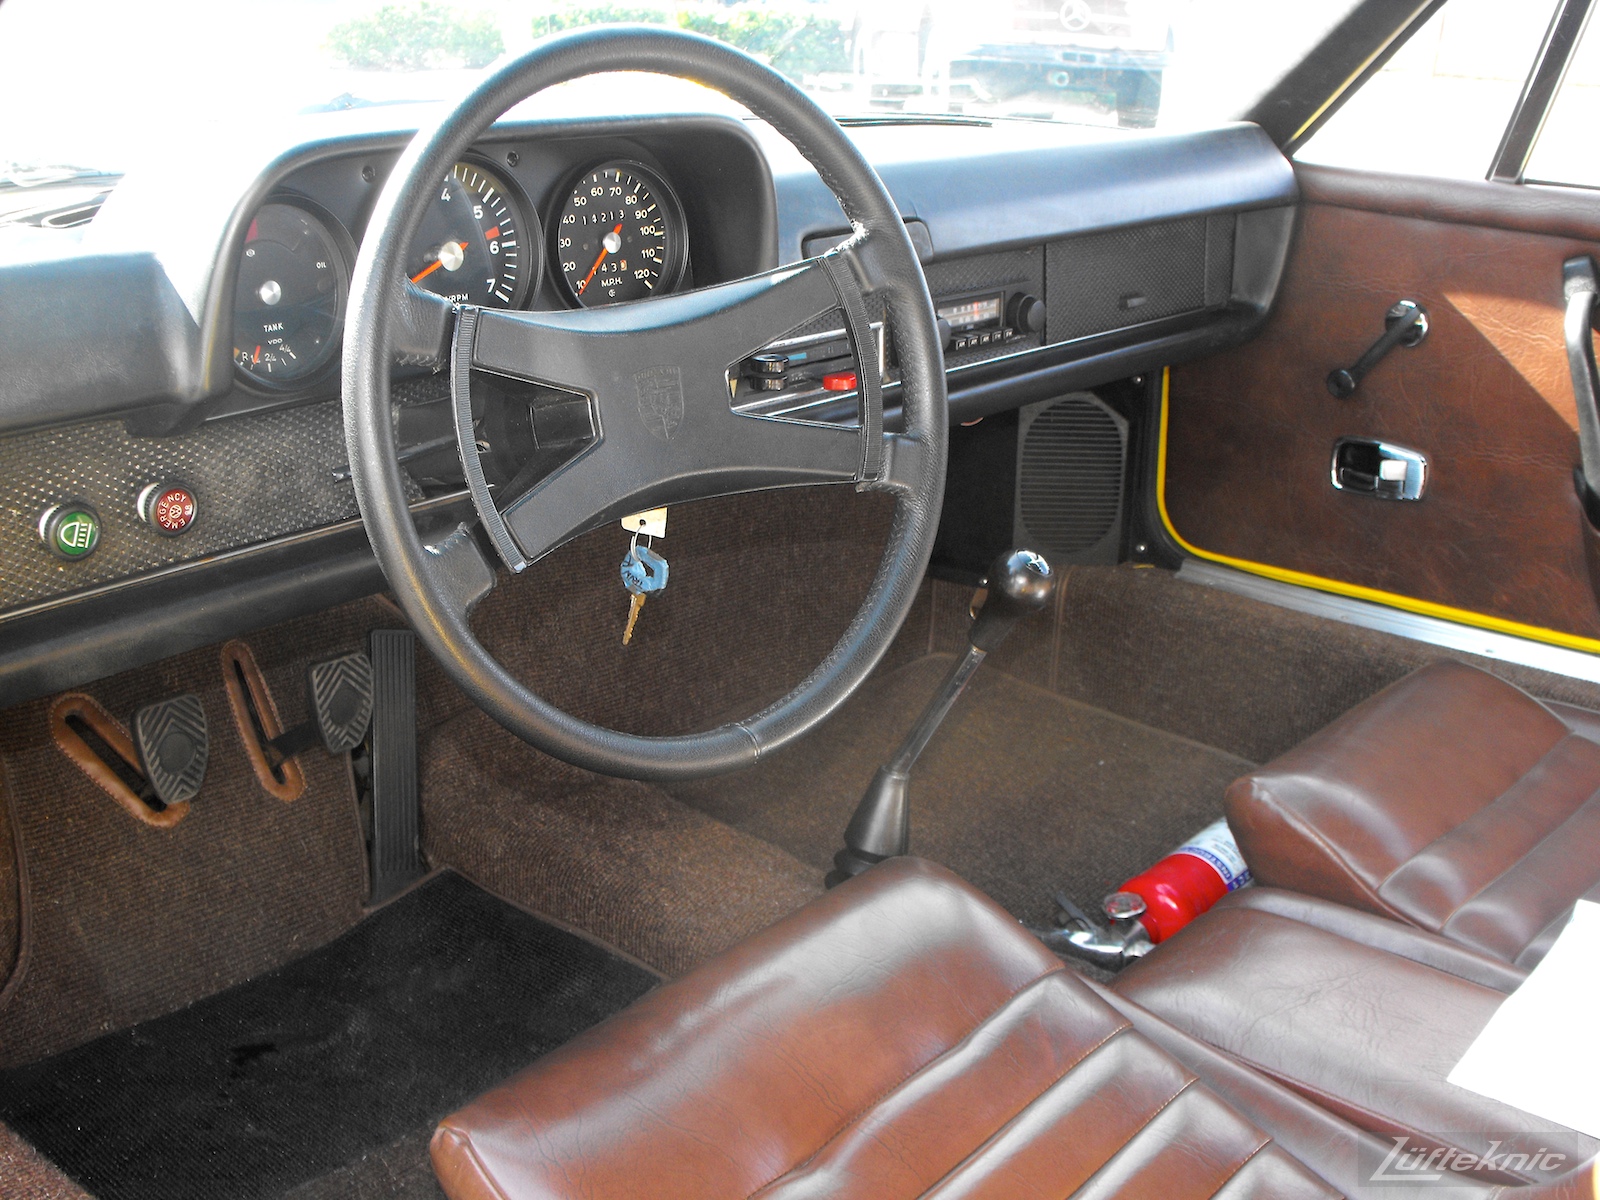 The all original interior of a completely restored yellow Porsche 914 posing in the parking lot of Lufteknic.